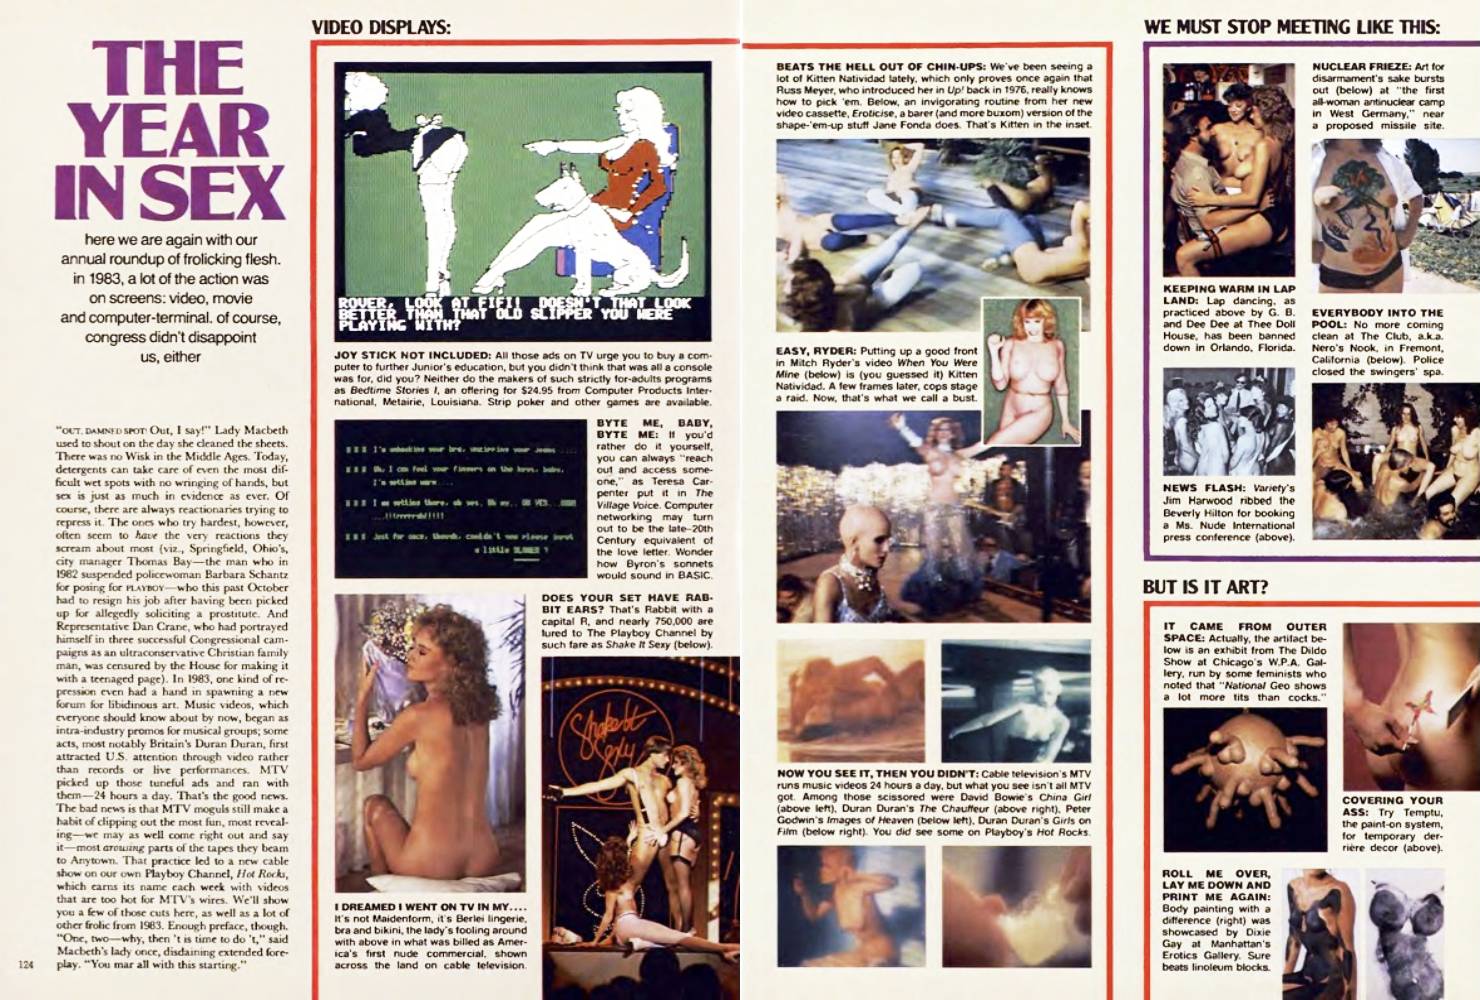 The Year in Sex, February 1984